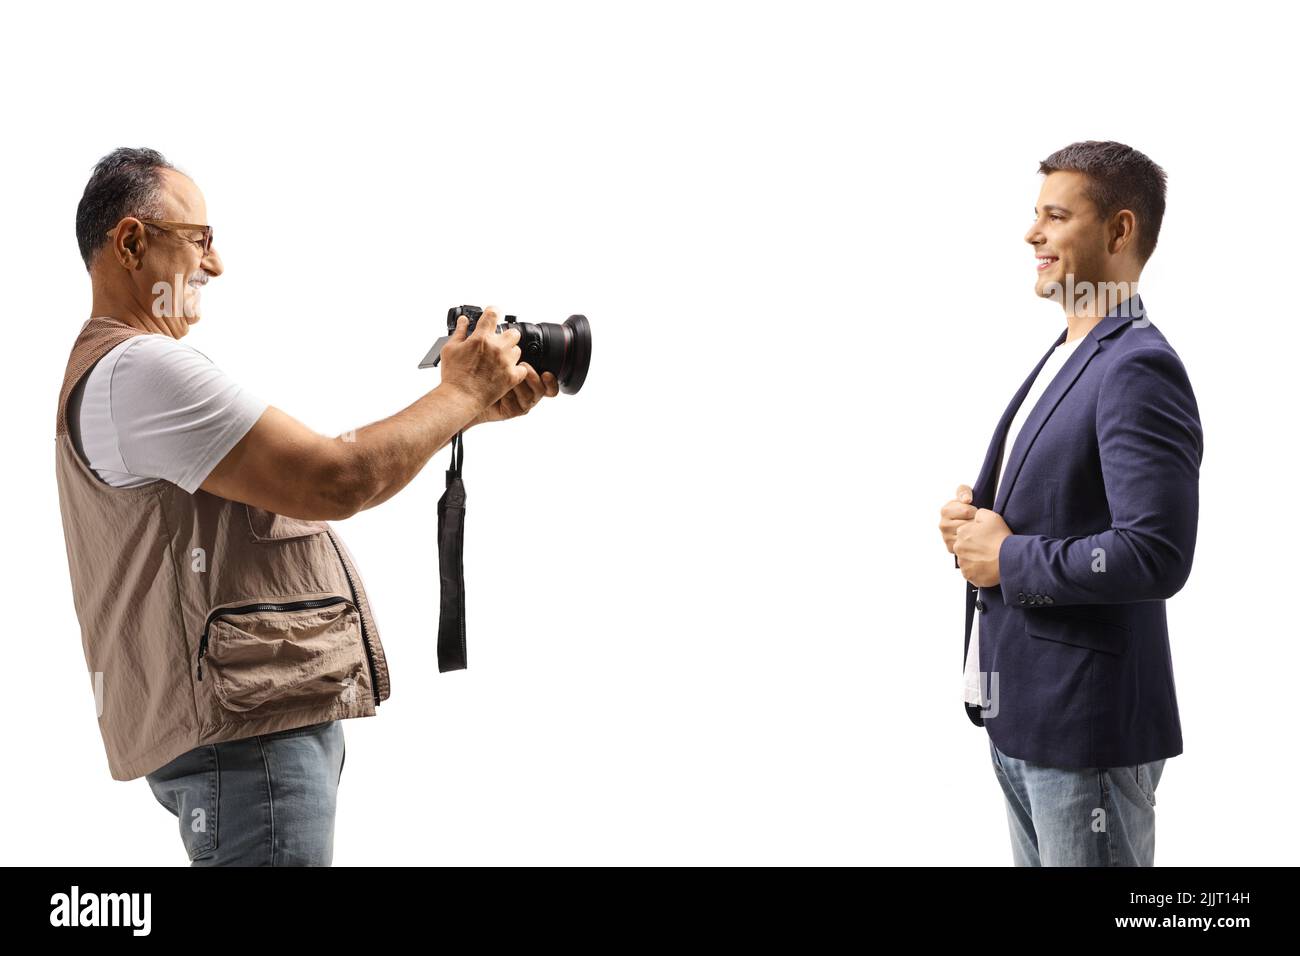 Mature man taking a photo of a young man with a professional camera isolated on white background Stock Photo